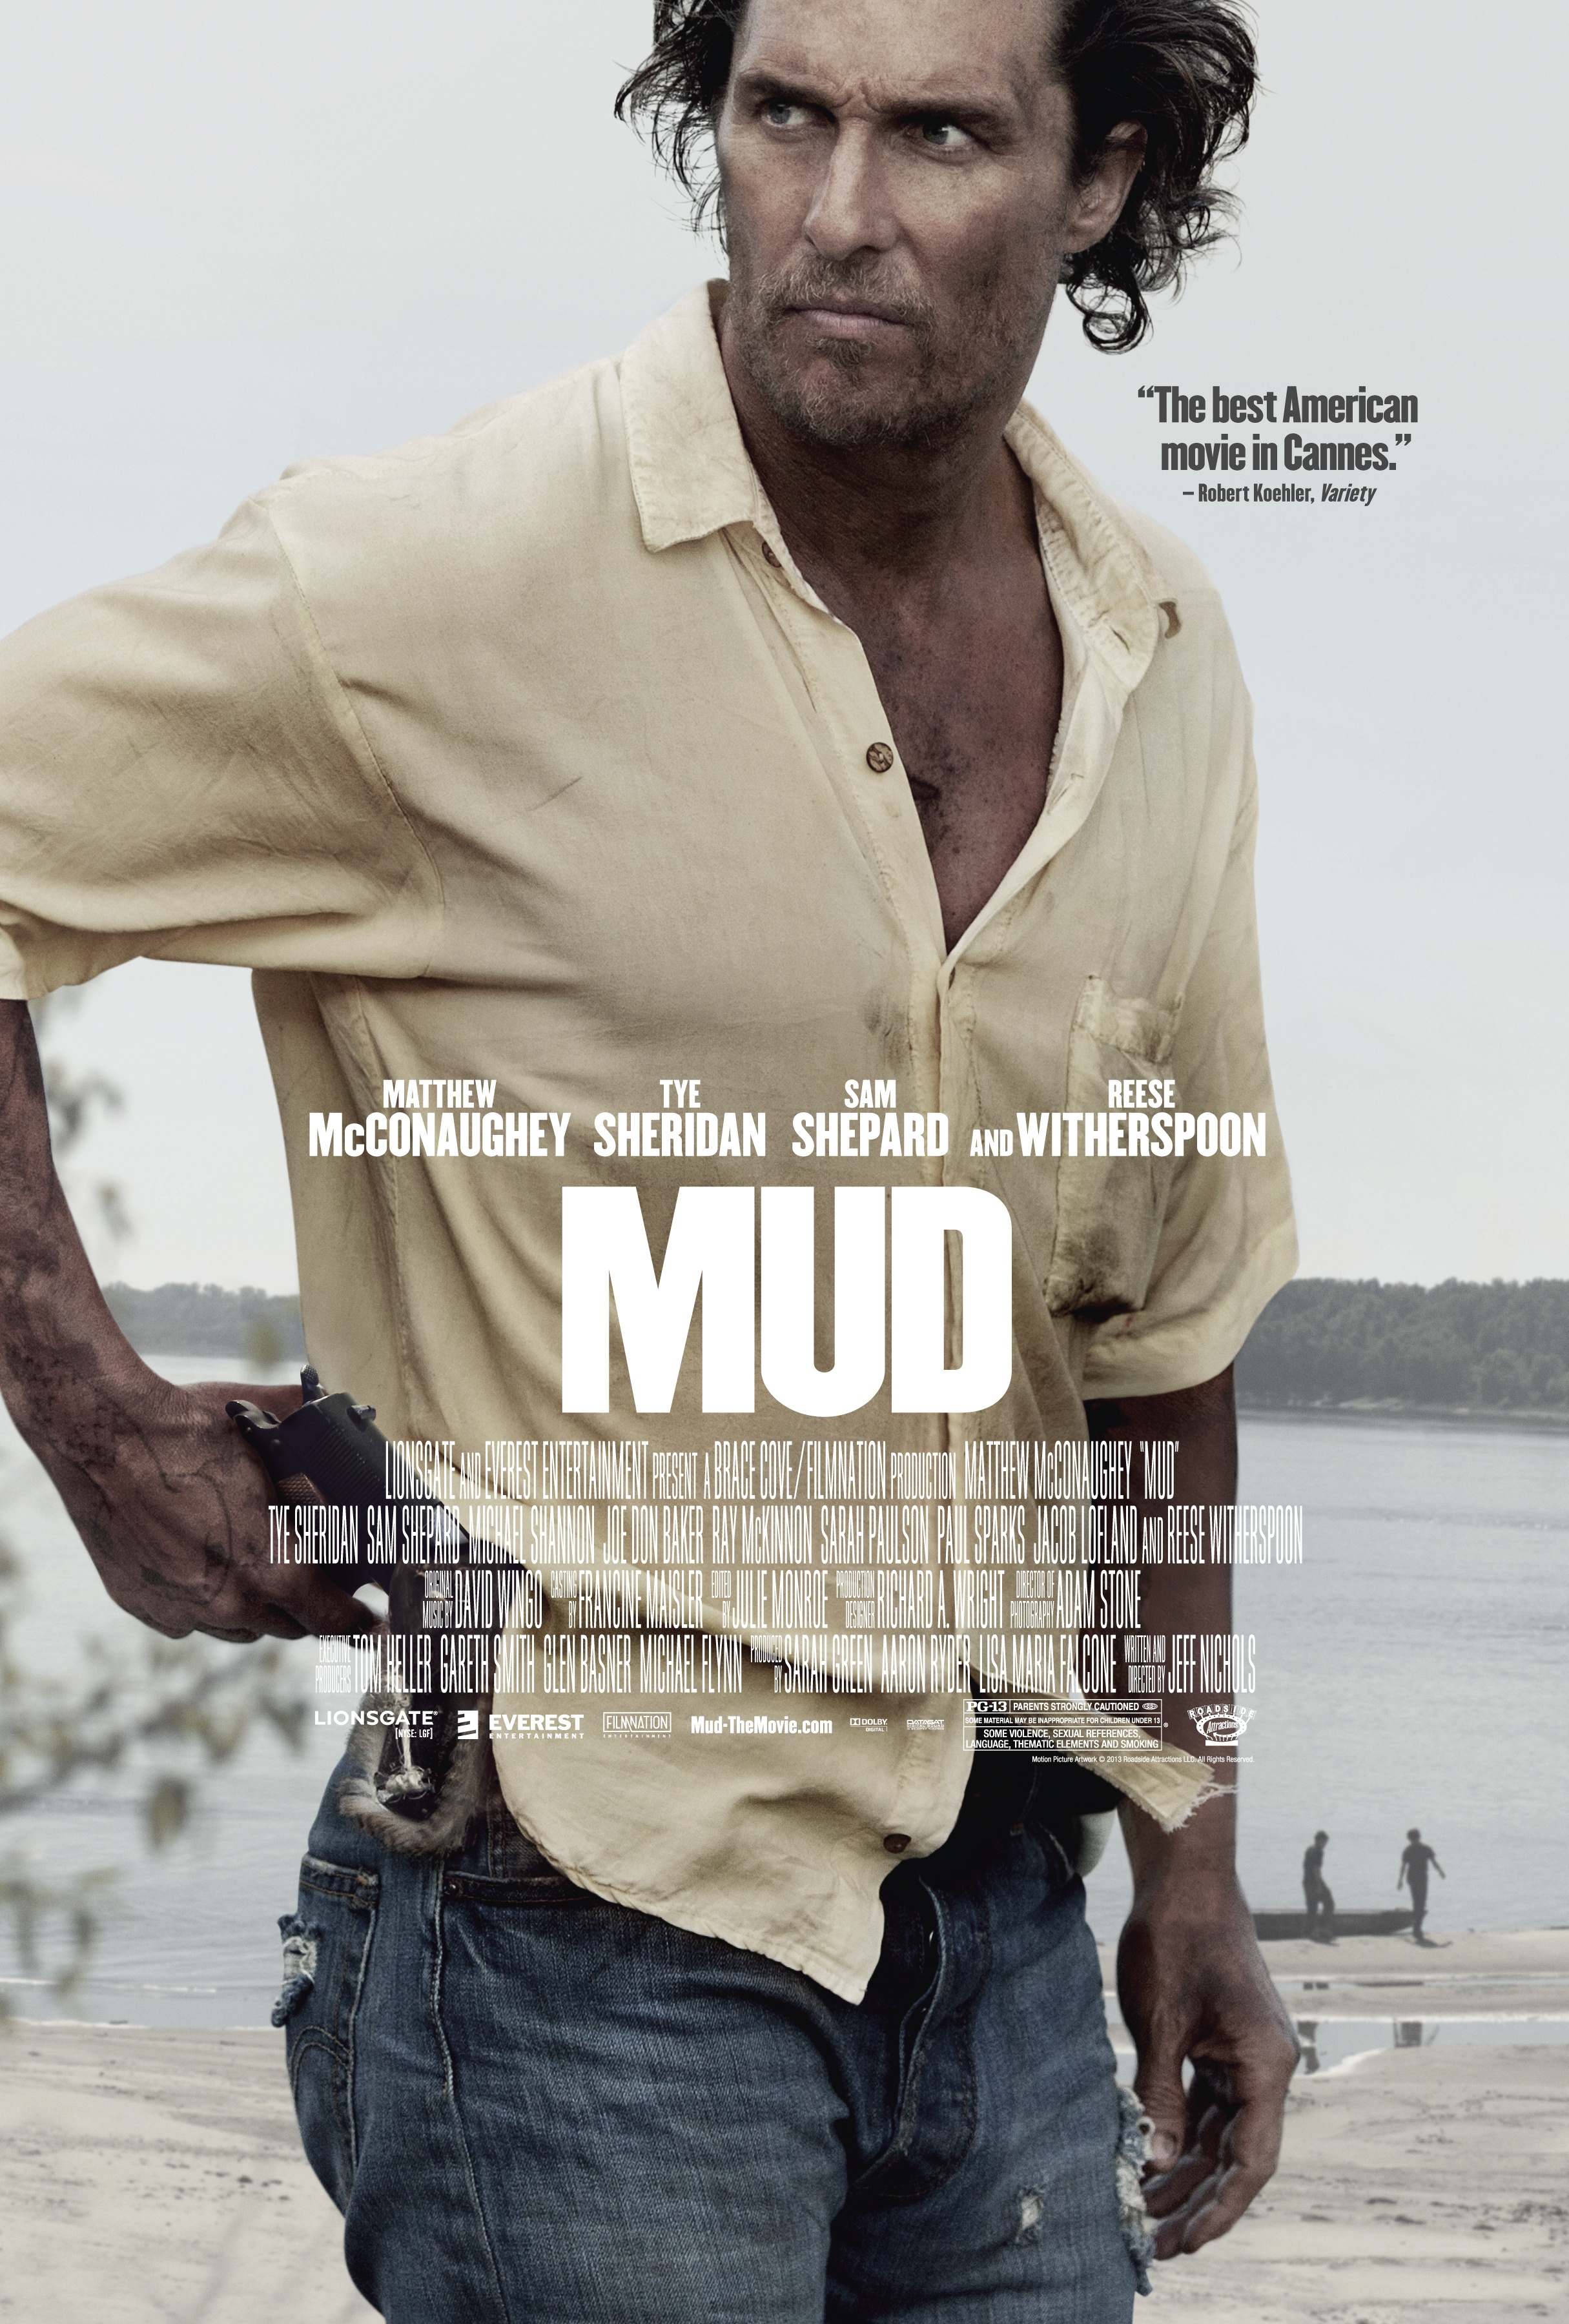 Mud - movie that will change your life